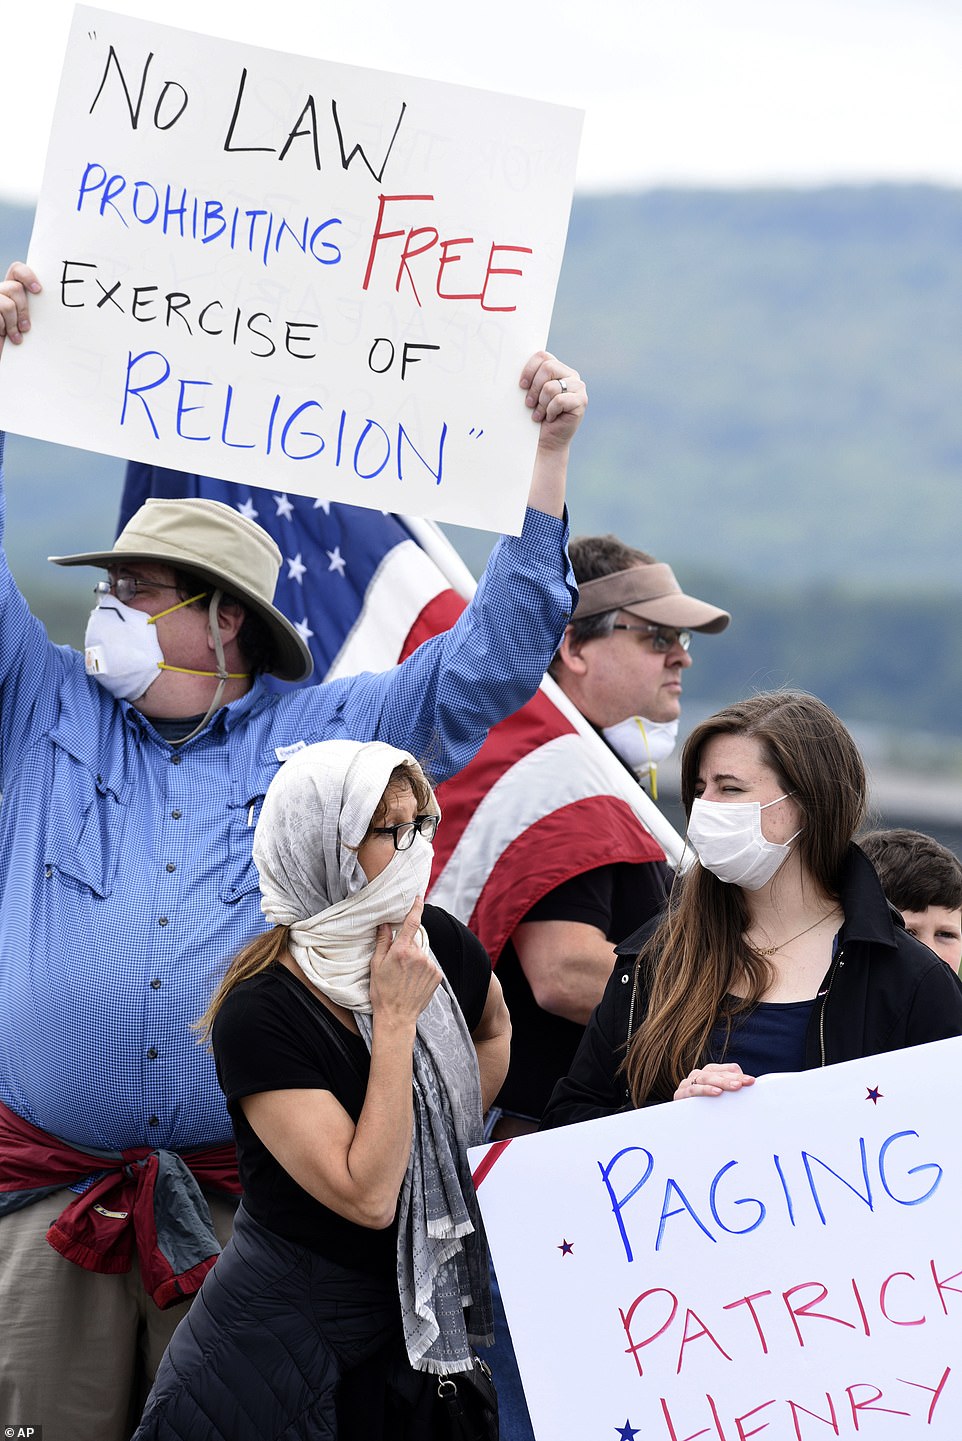 protest - No Law Prohibiting Free Exercise Of Religion" .Paging Patrick Thenry Ap